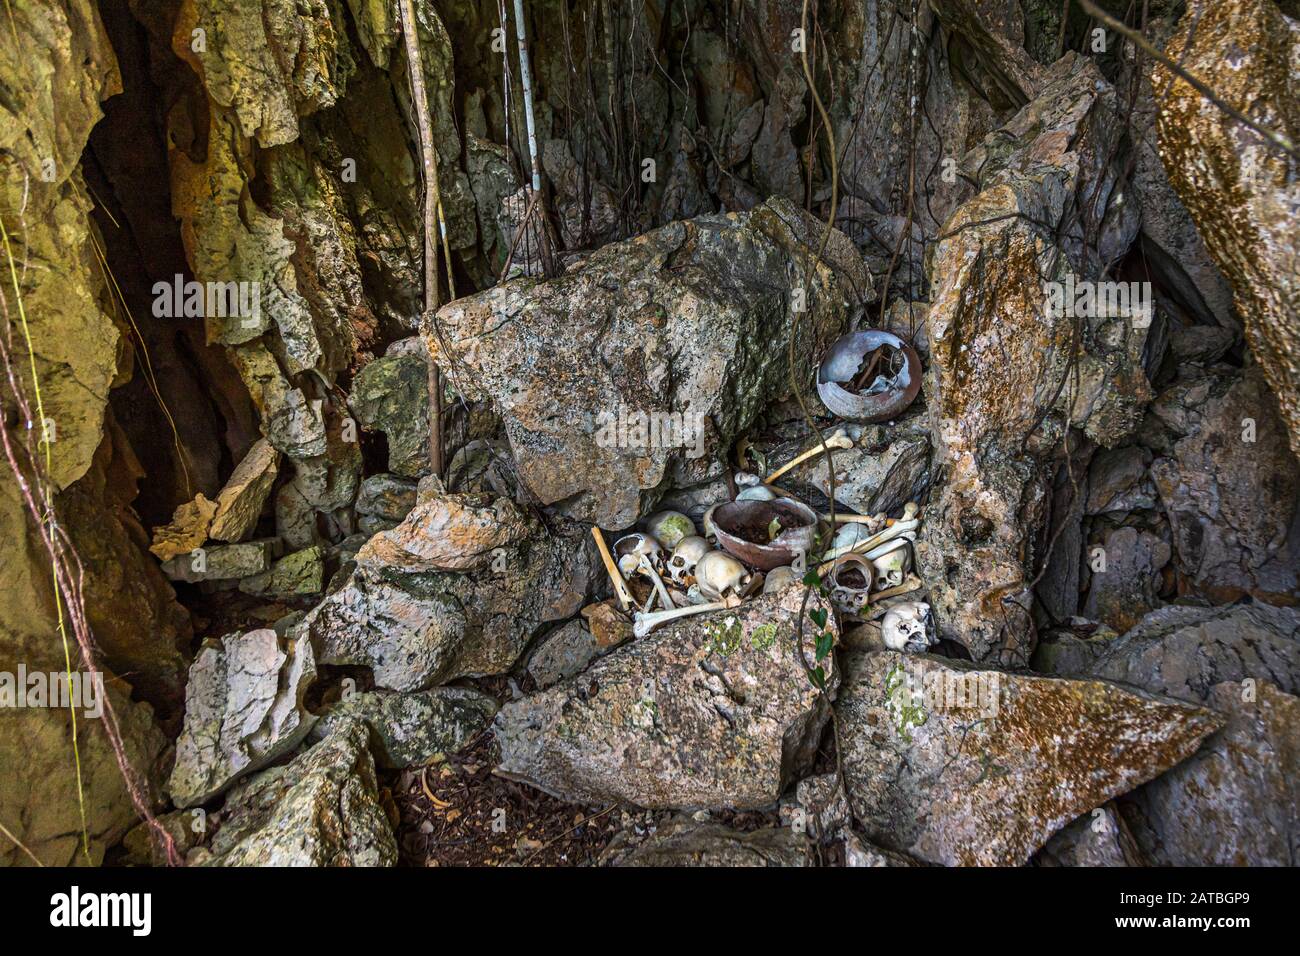 Skulls of cannibals left behind in a cave on the island of Pana Wara Wara in Papua New Guinea. Skulls and human bones are clearly visible at the cannibal cult site Stock Photo